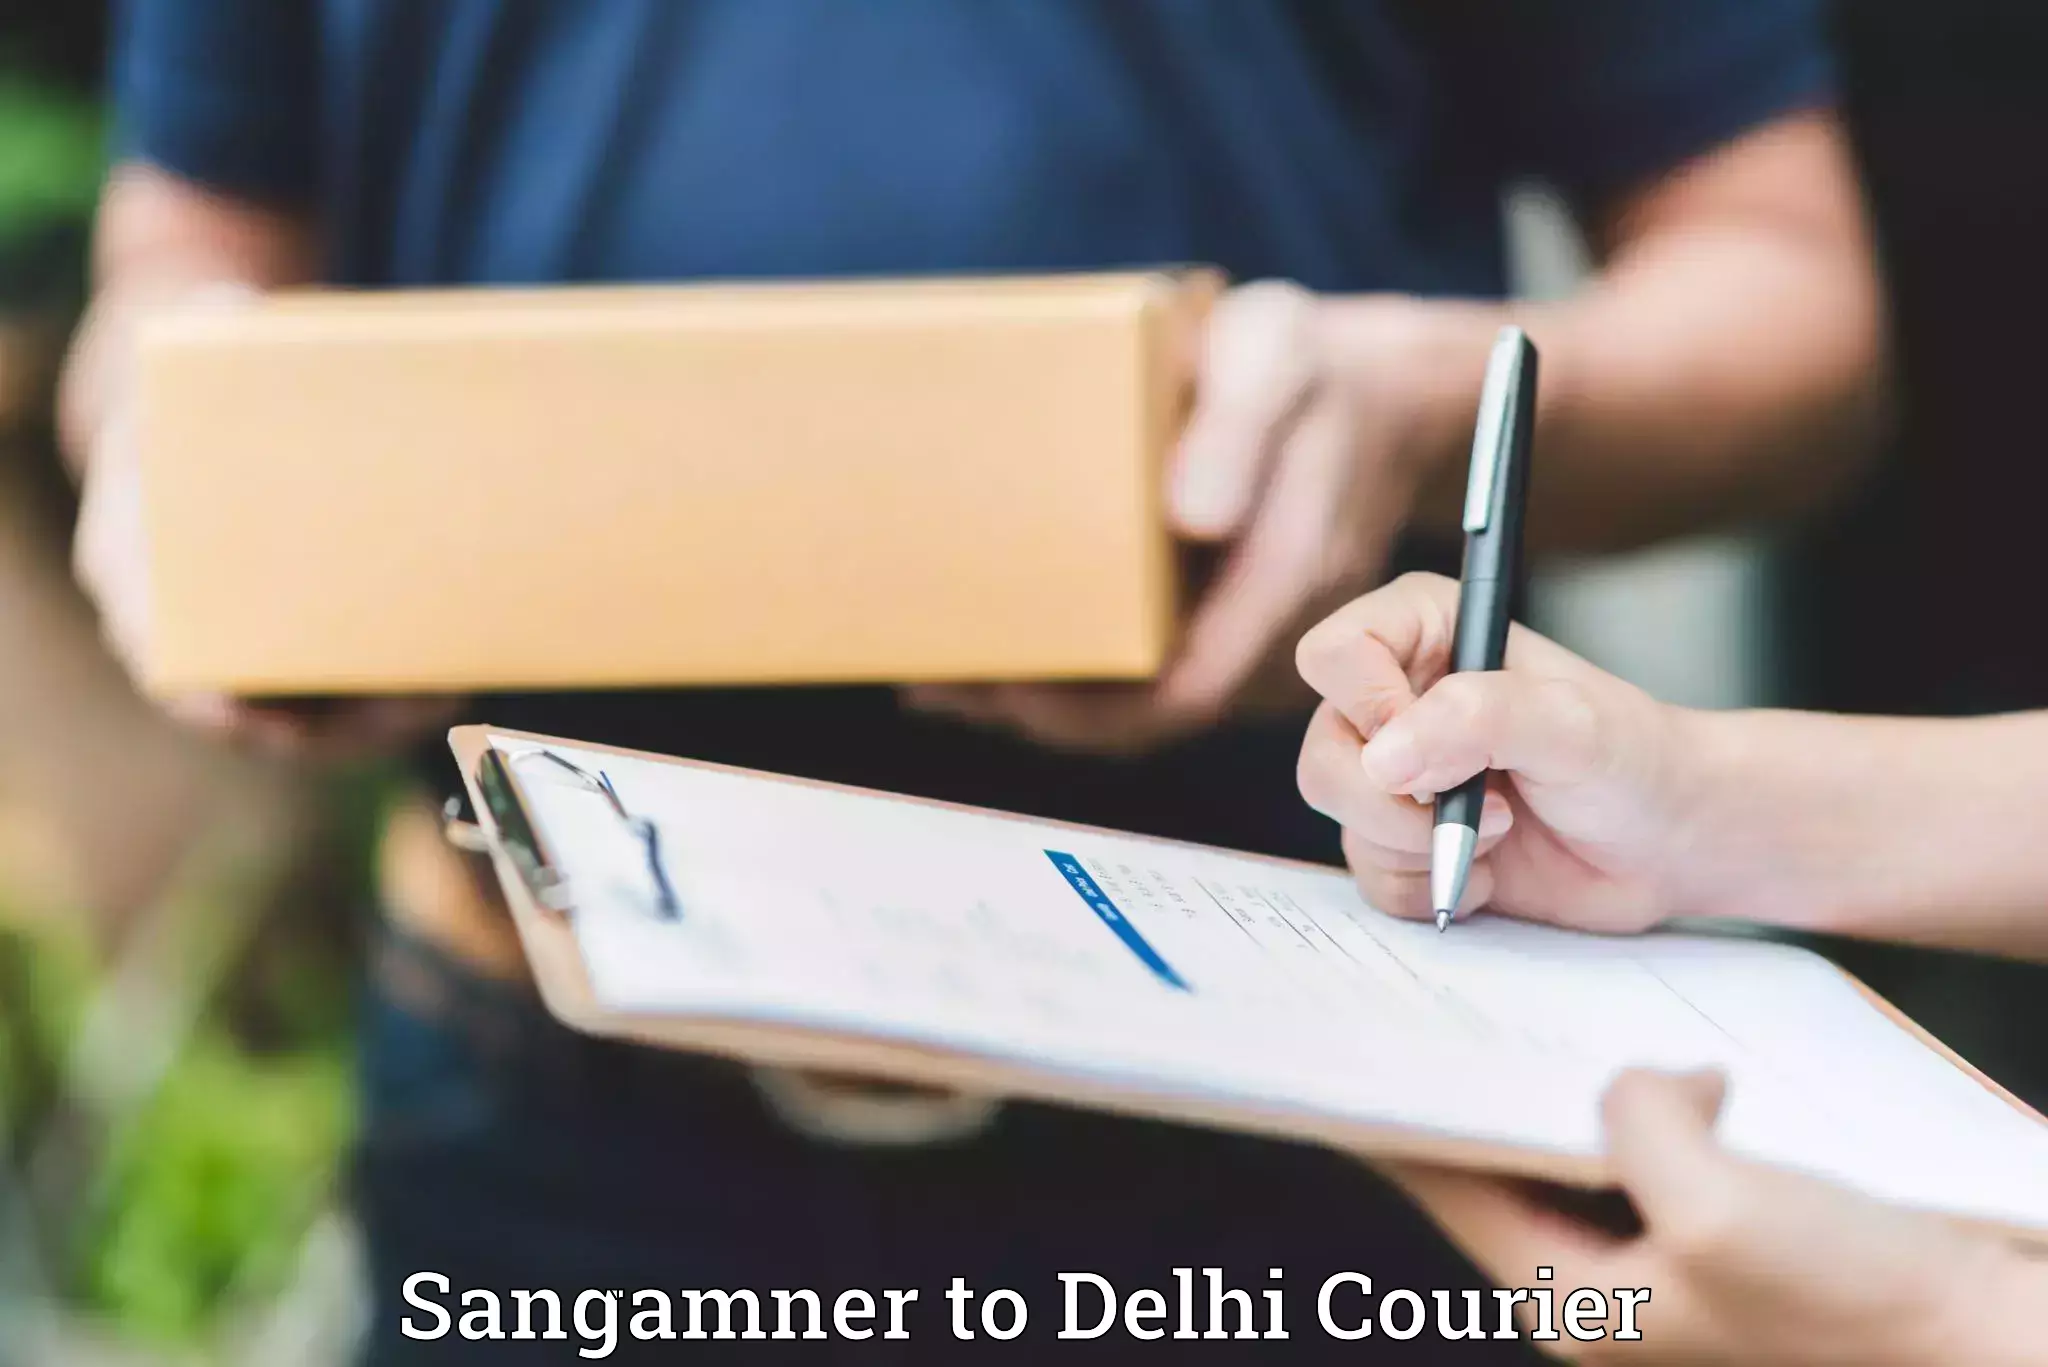 Personal effects shipping Sangamner to NCR